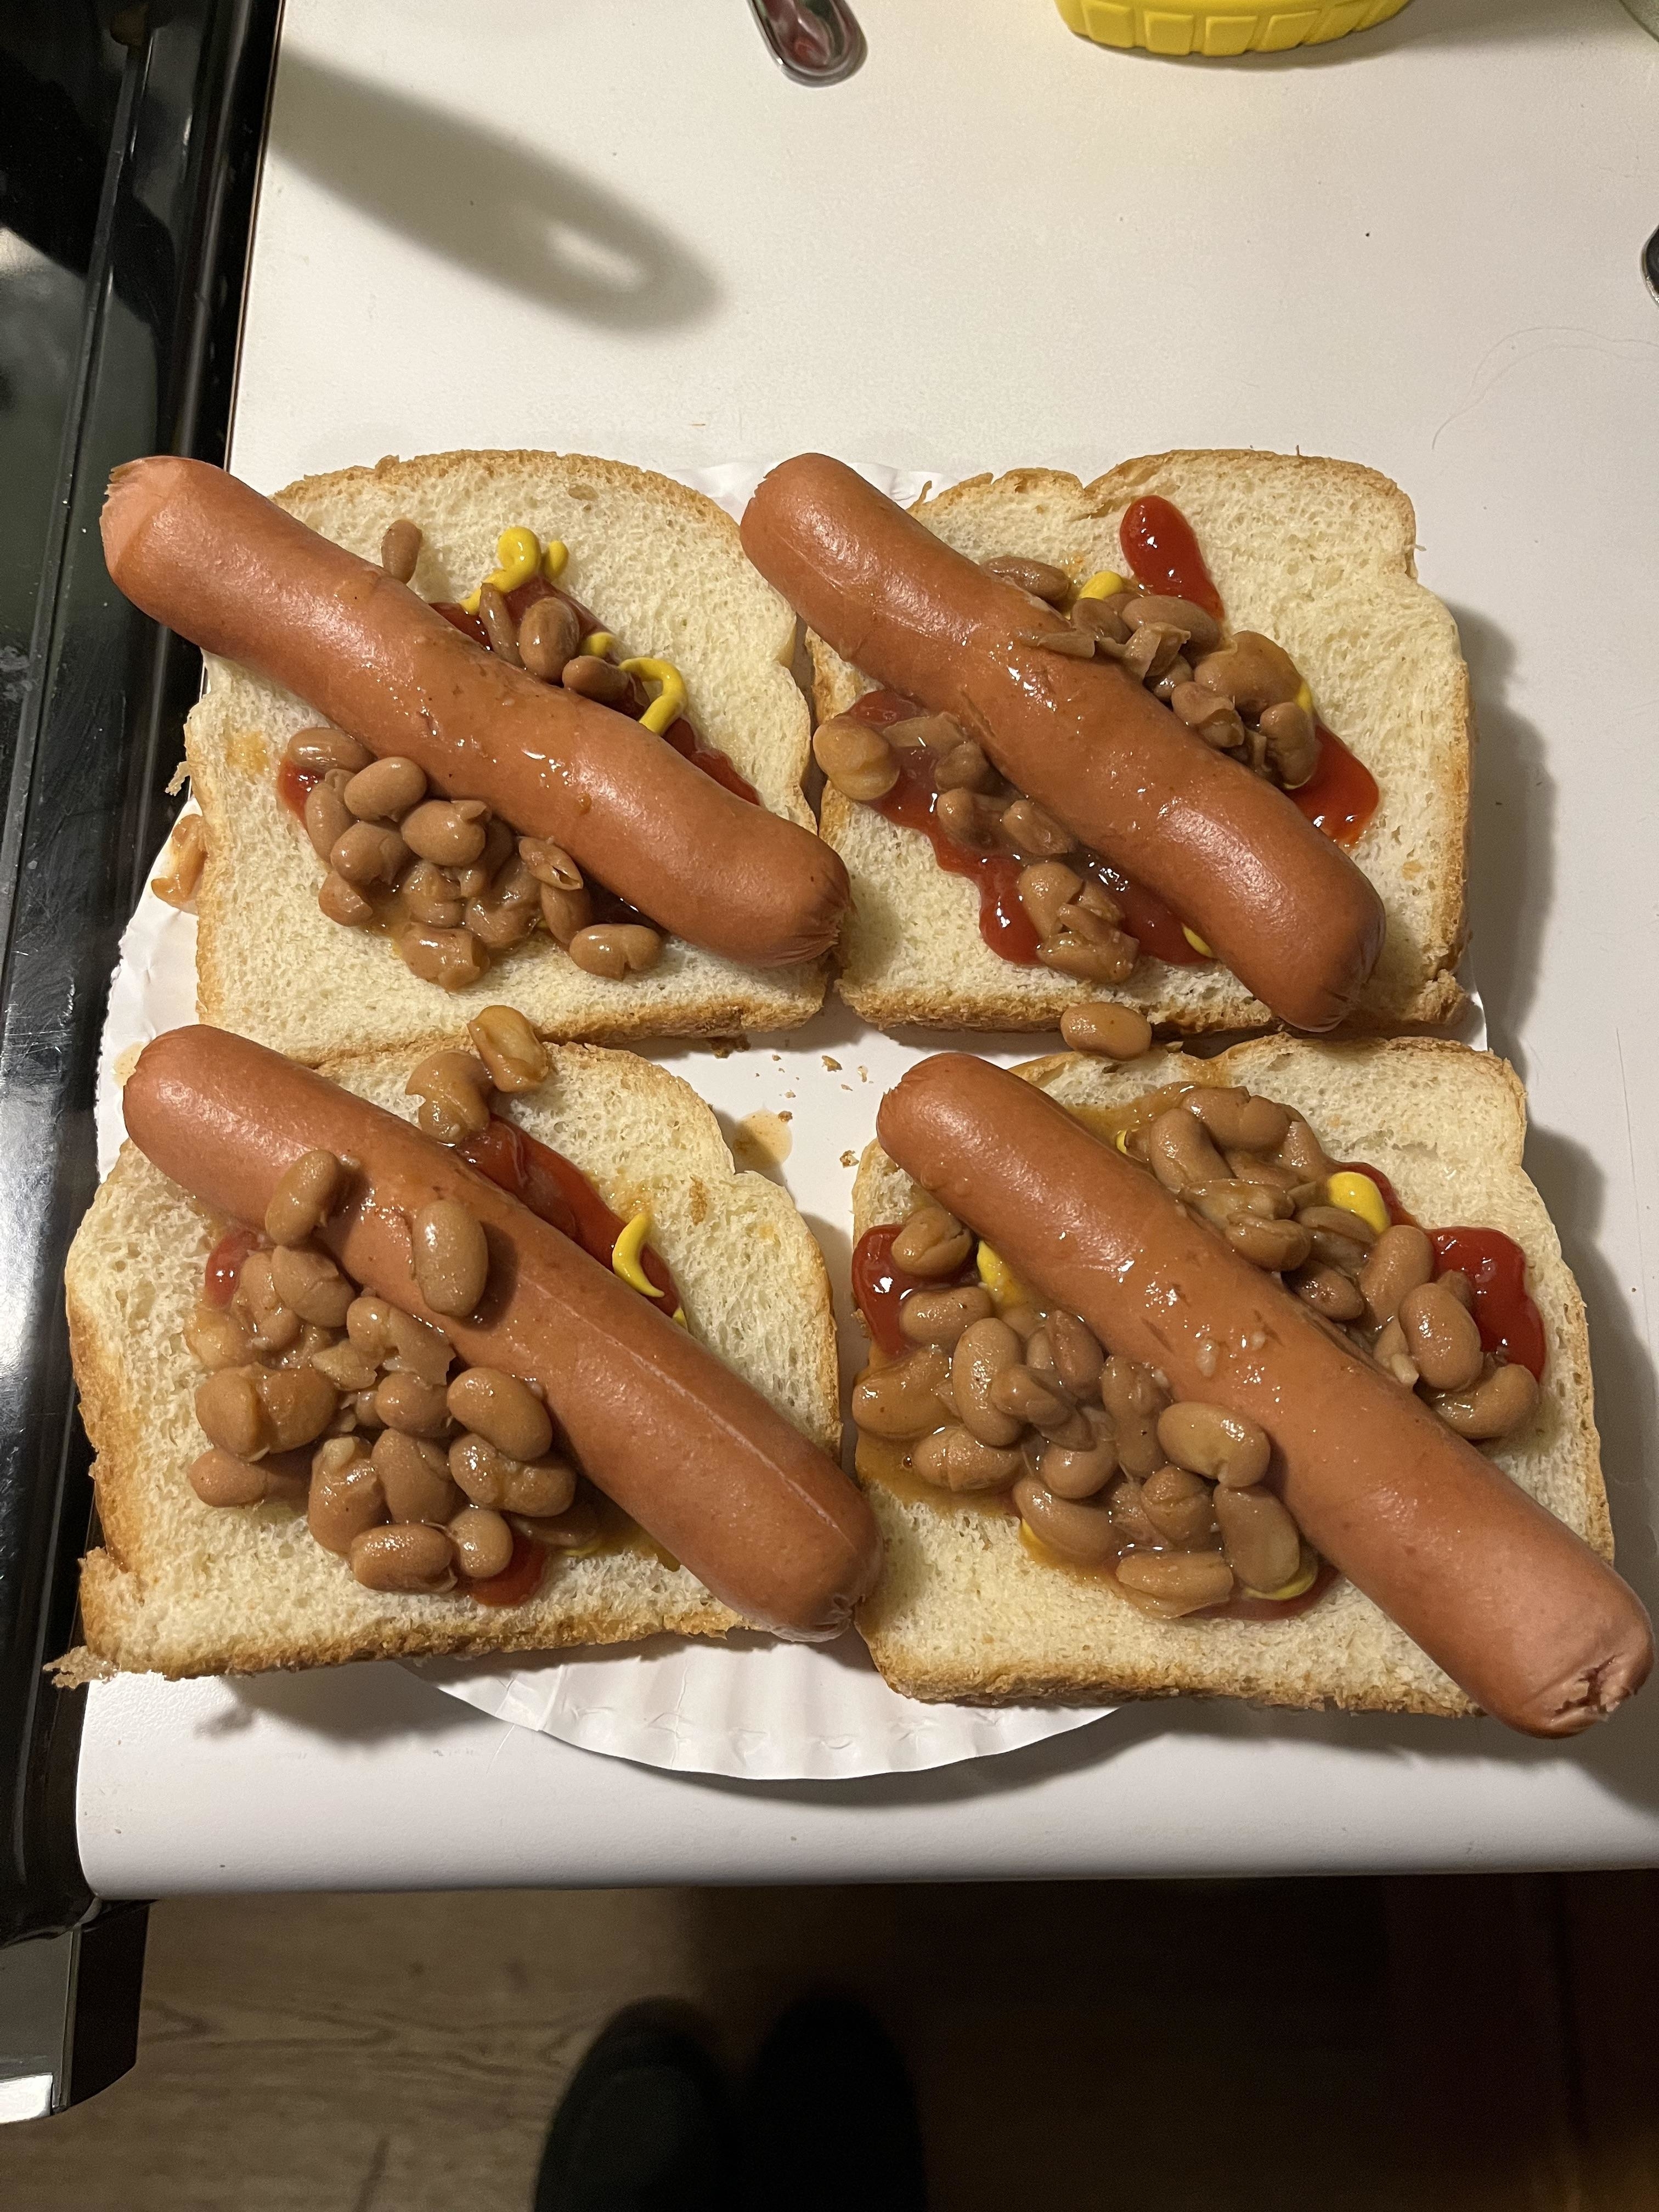 hot dogs and canned beans with ketchup and mustard on sliced white bread